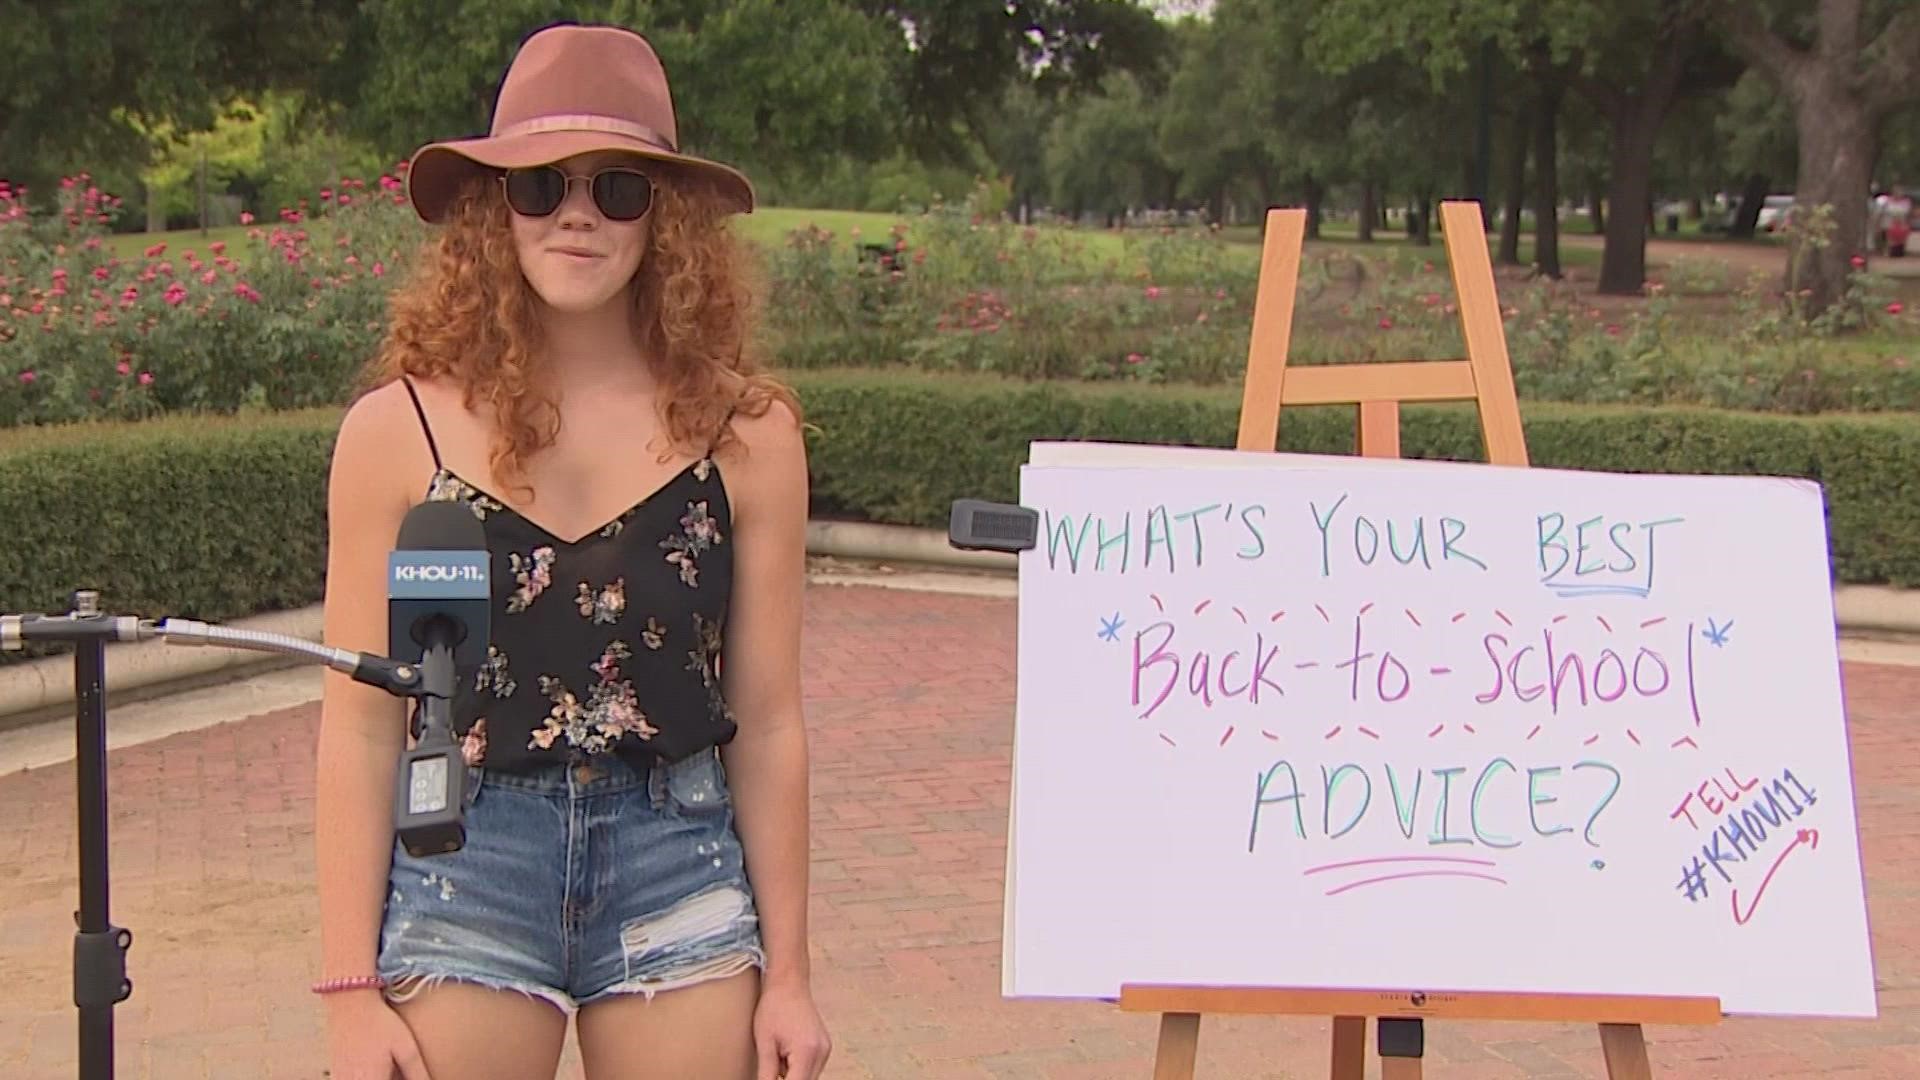 Reporter Michelle Choi ventured out to Hermann Park to ask parents, students and even teachers to share lessons their back-to-school advice.